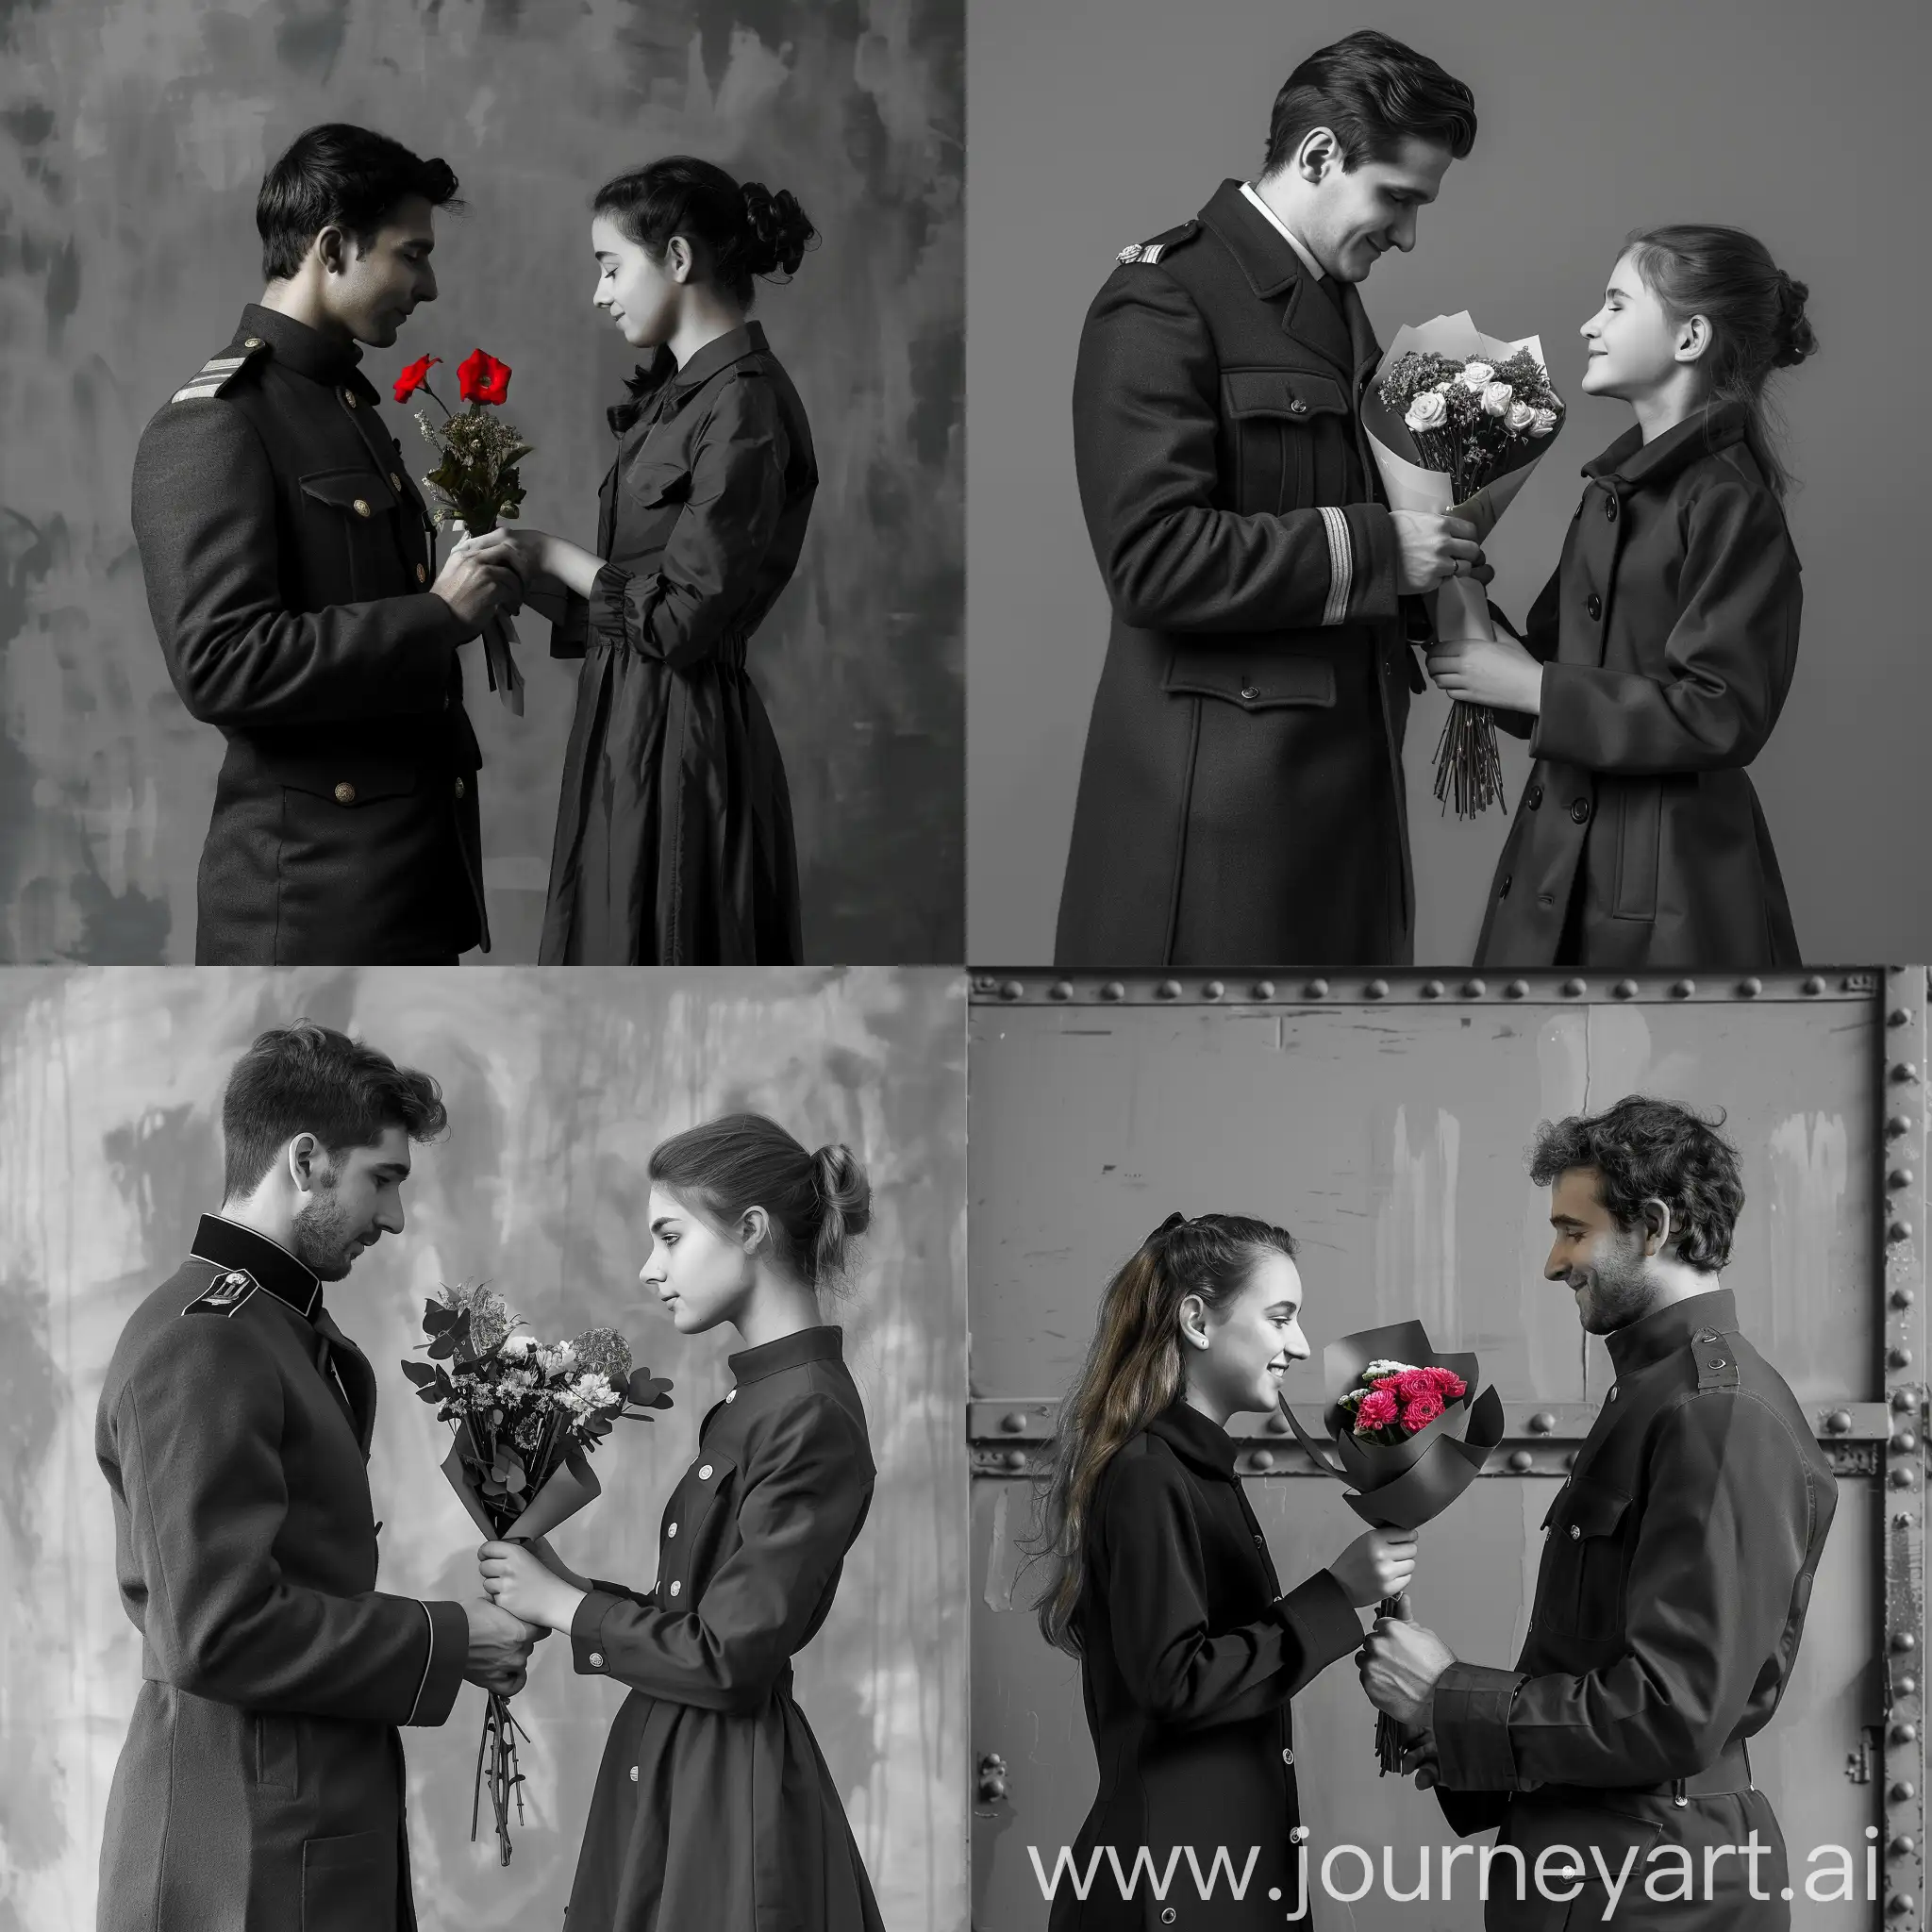 Elegant-Gesture-Man-Presenting-Flowers-to-Woman-in-Stylish-Monochrome-Composition